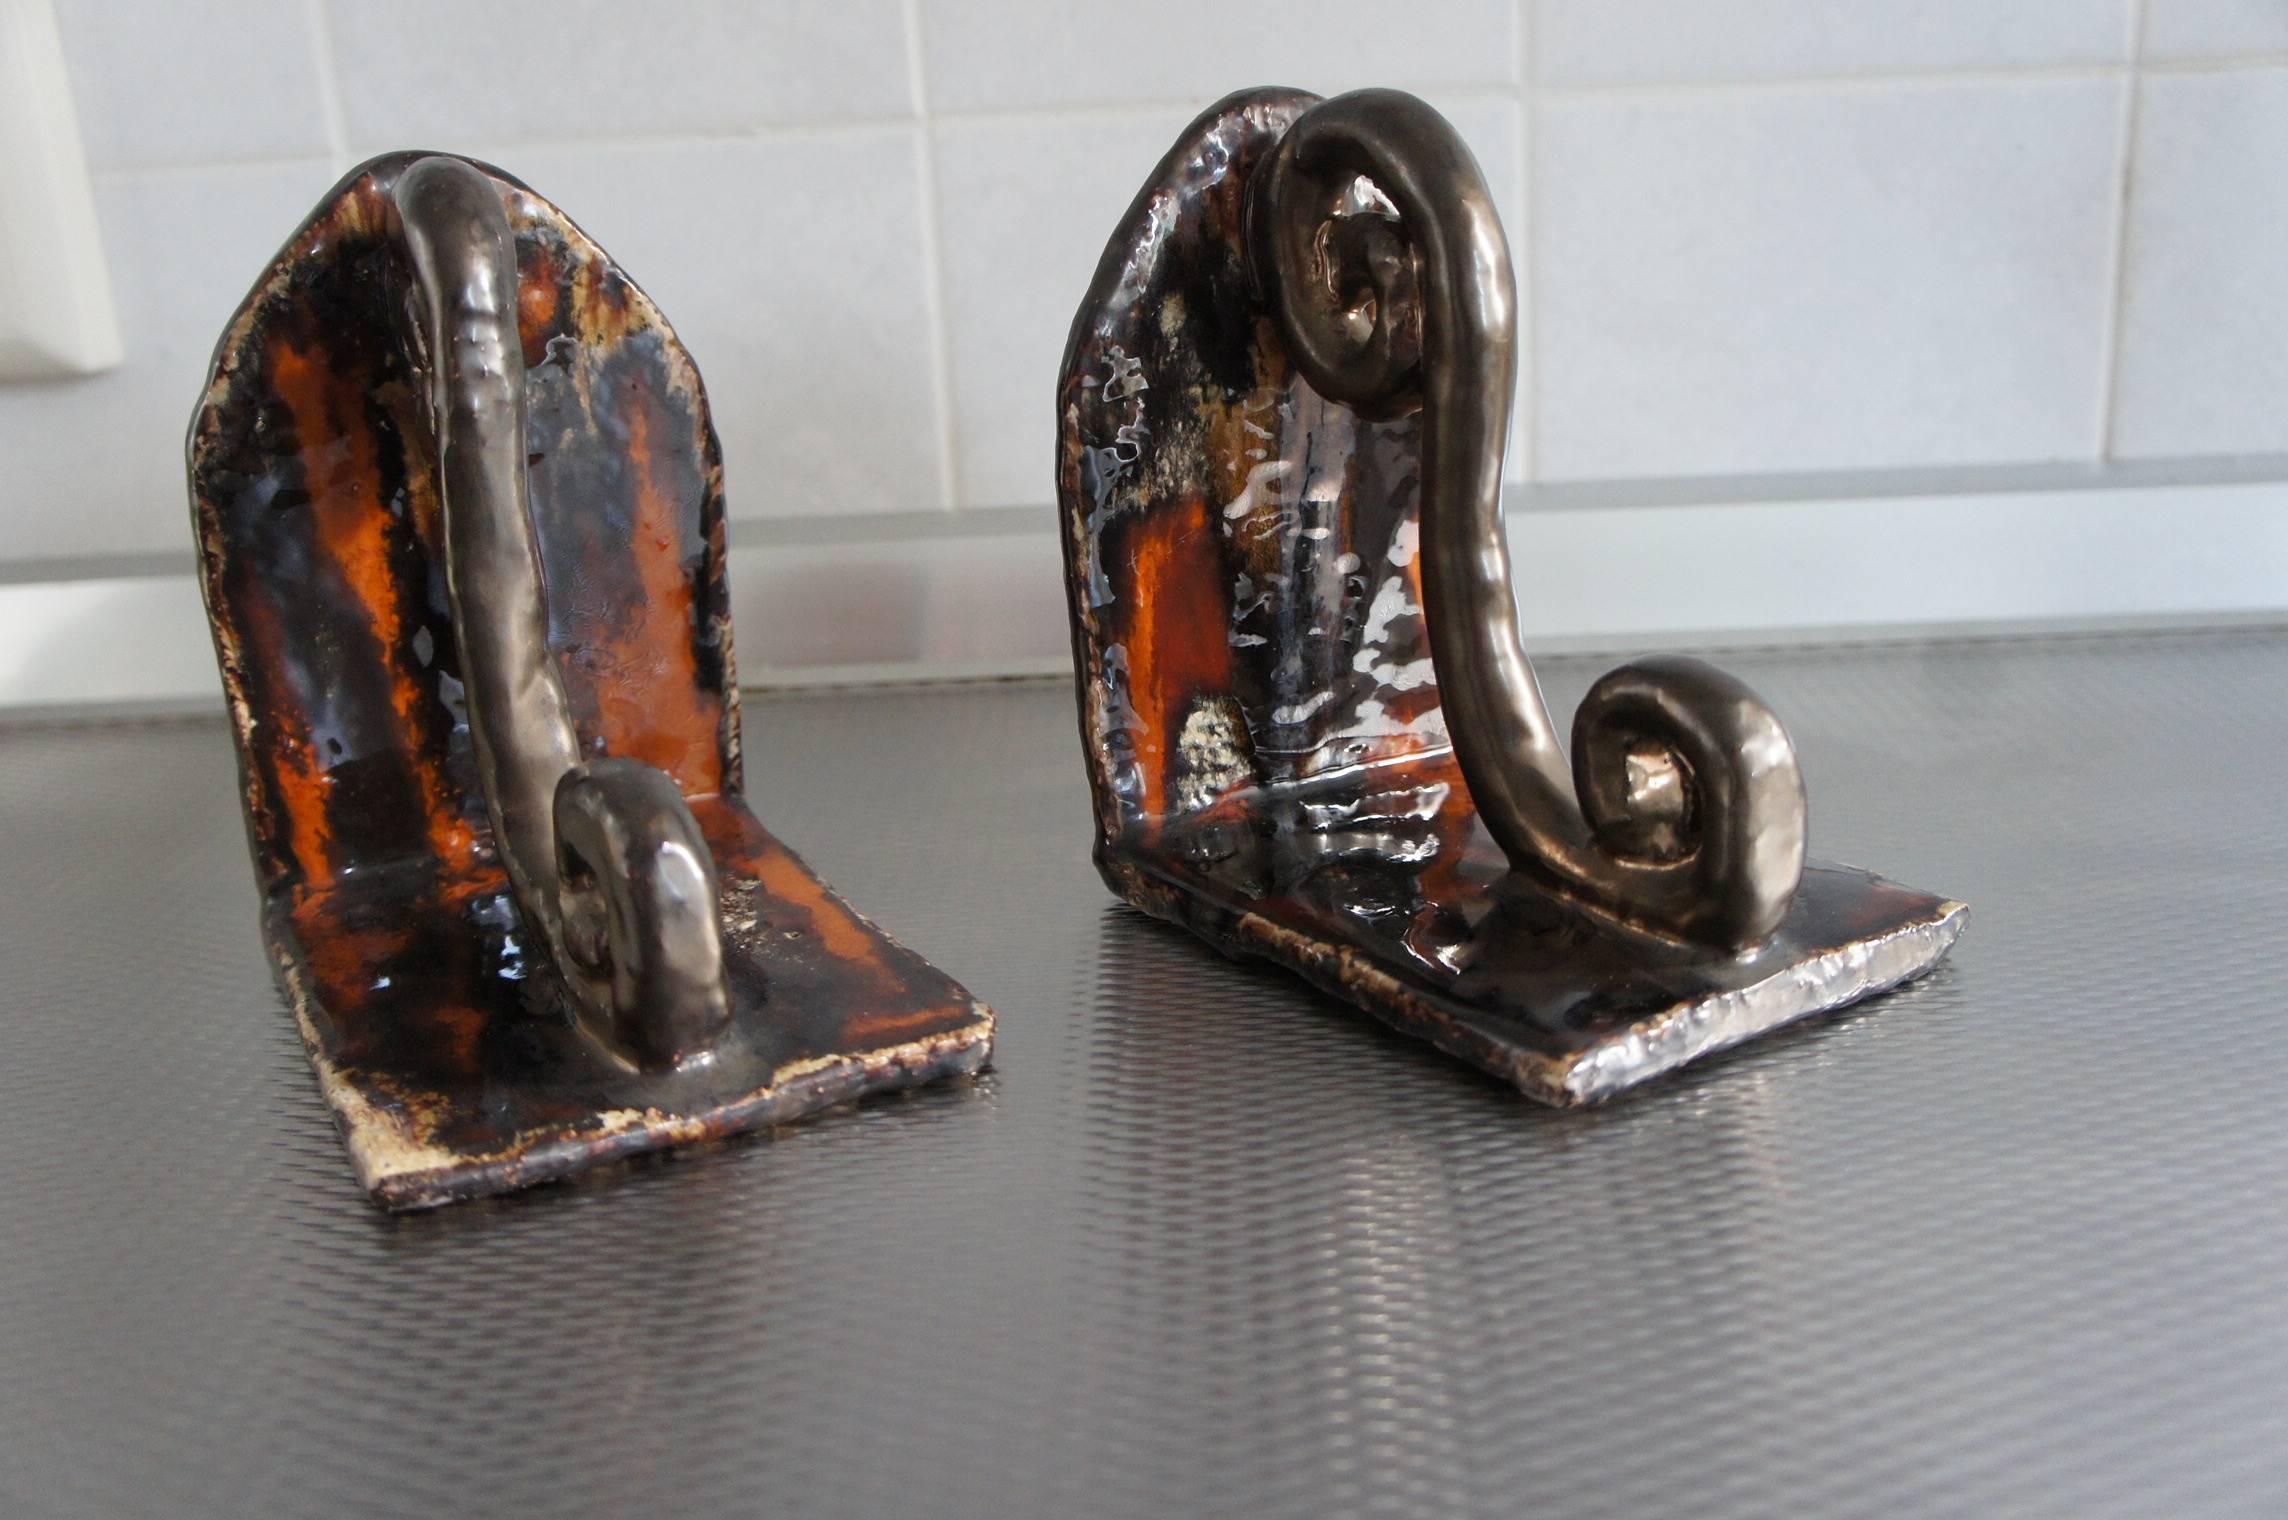 Wonderful pair of beautifully shaped and glazed bookends.

These rare vintage glazed earthenware bookends from Belgium or Germany are in mint condition. These 1960s bookends make great display pieces on a shelve, desk or sidetable. It's amazing how